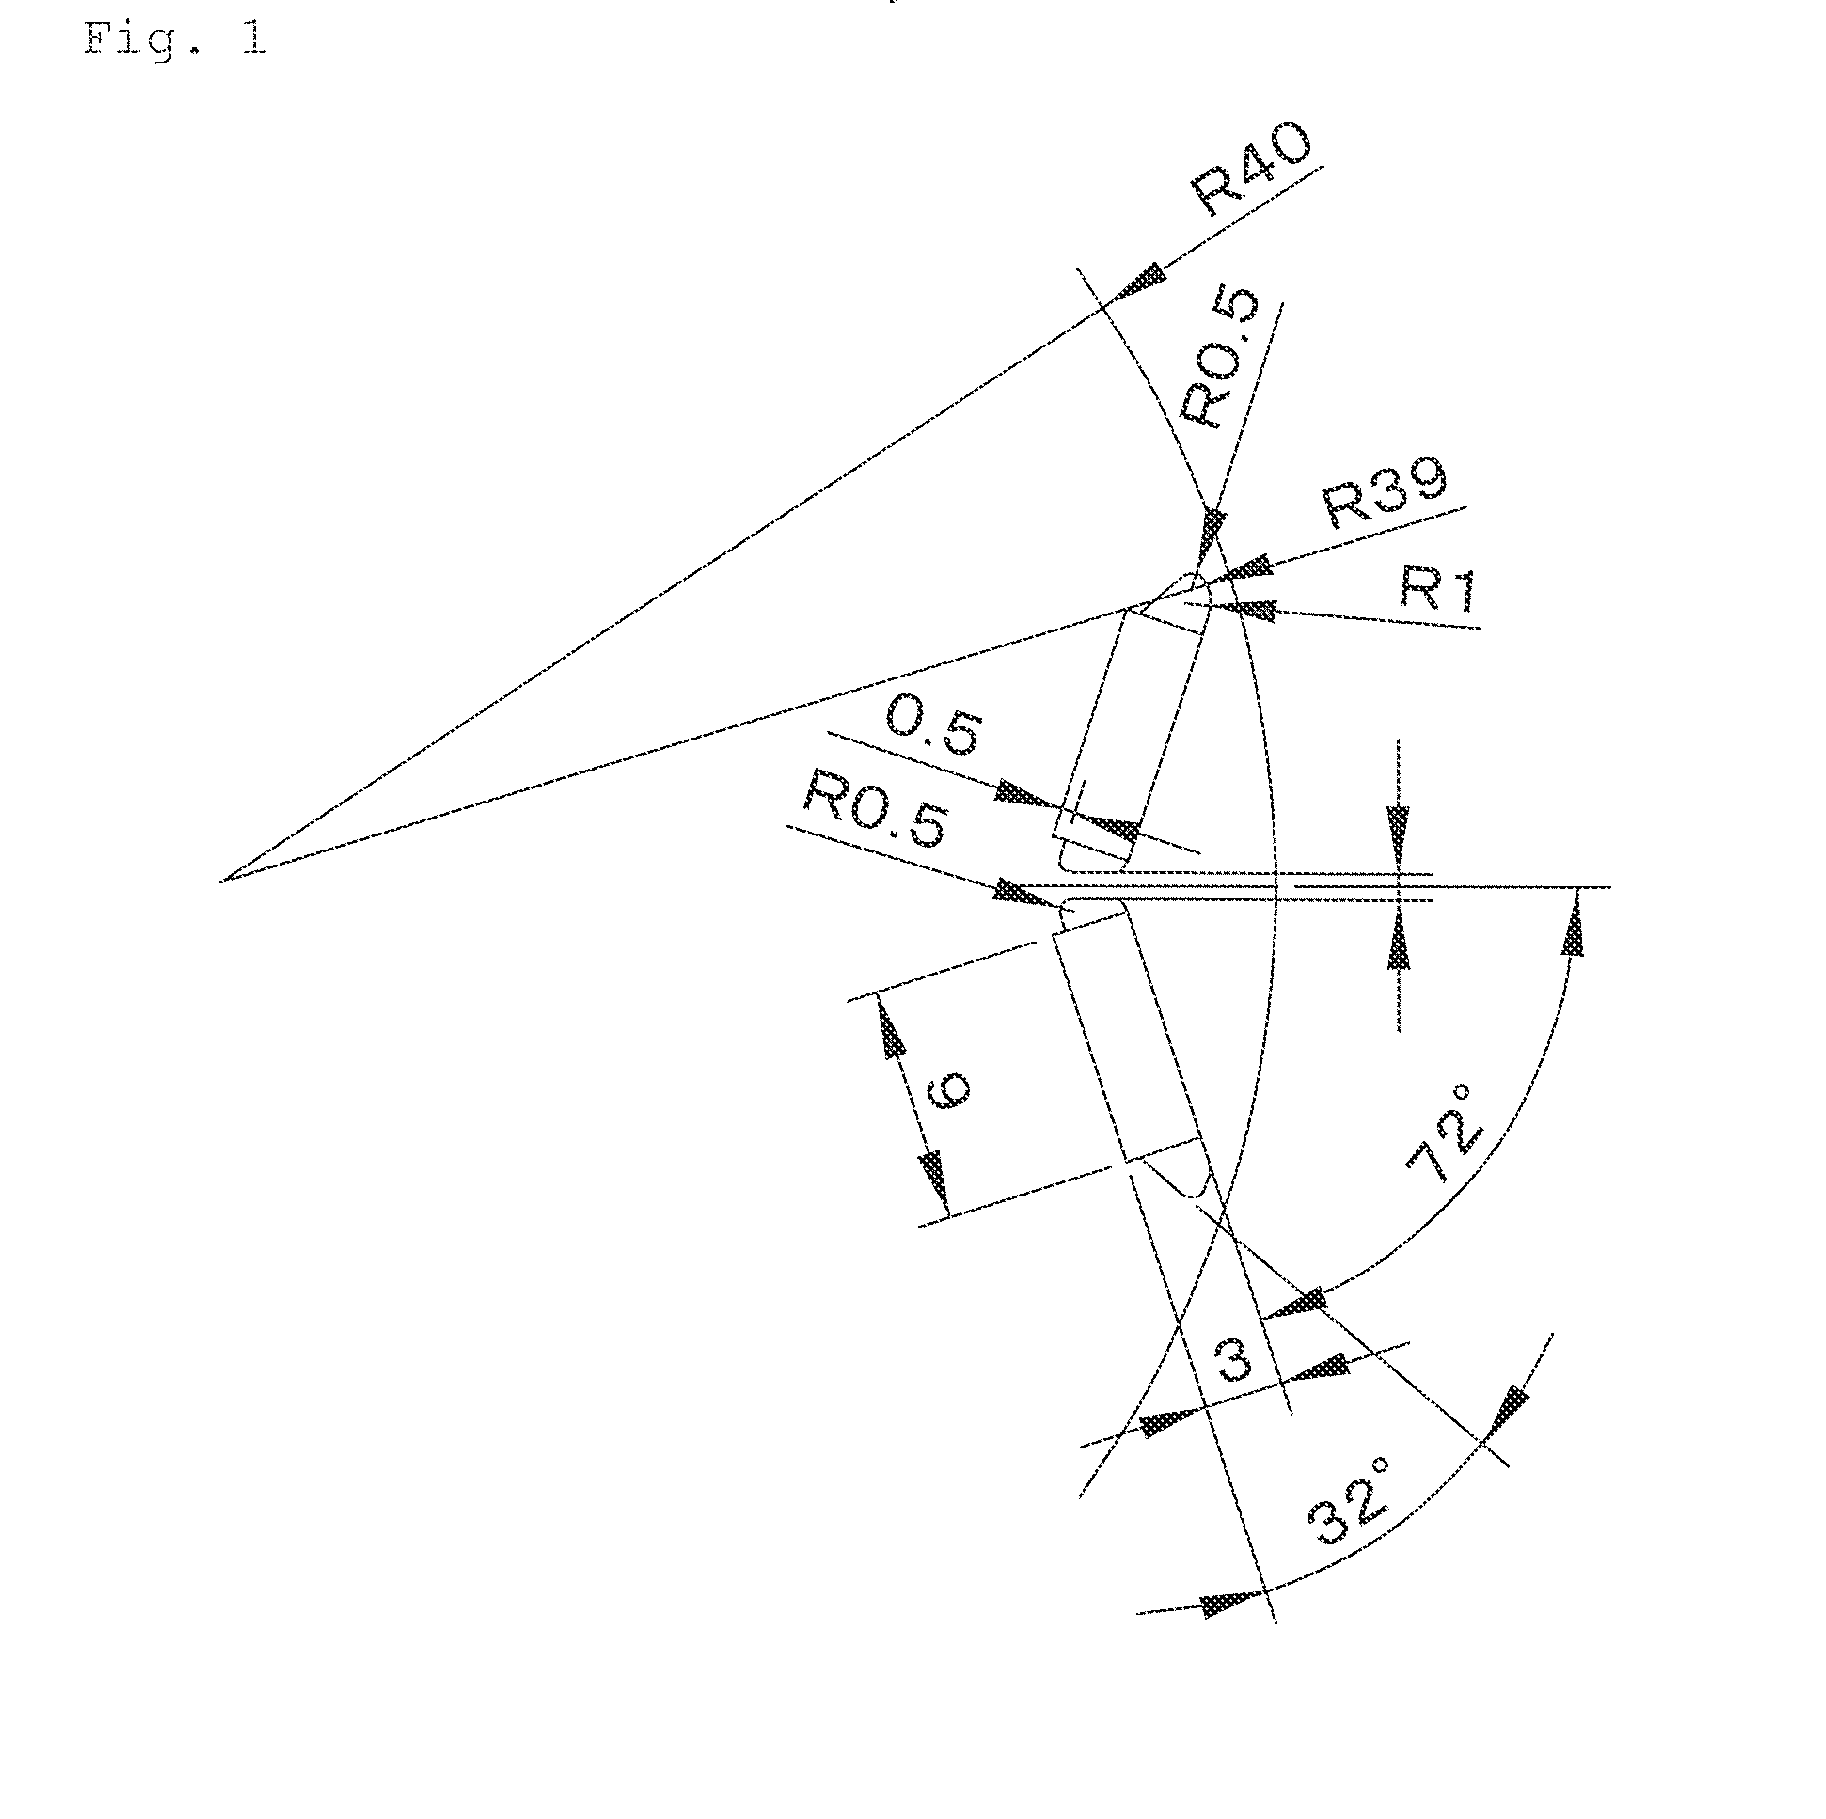 Steel sheet for rotor core for ipm motor, and method for manufacturing same